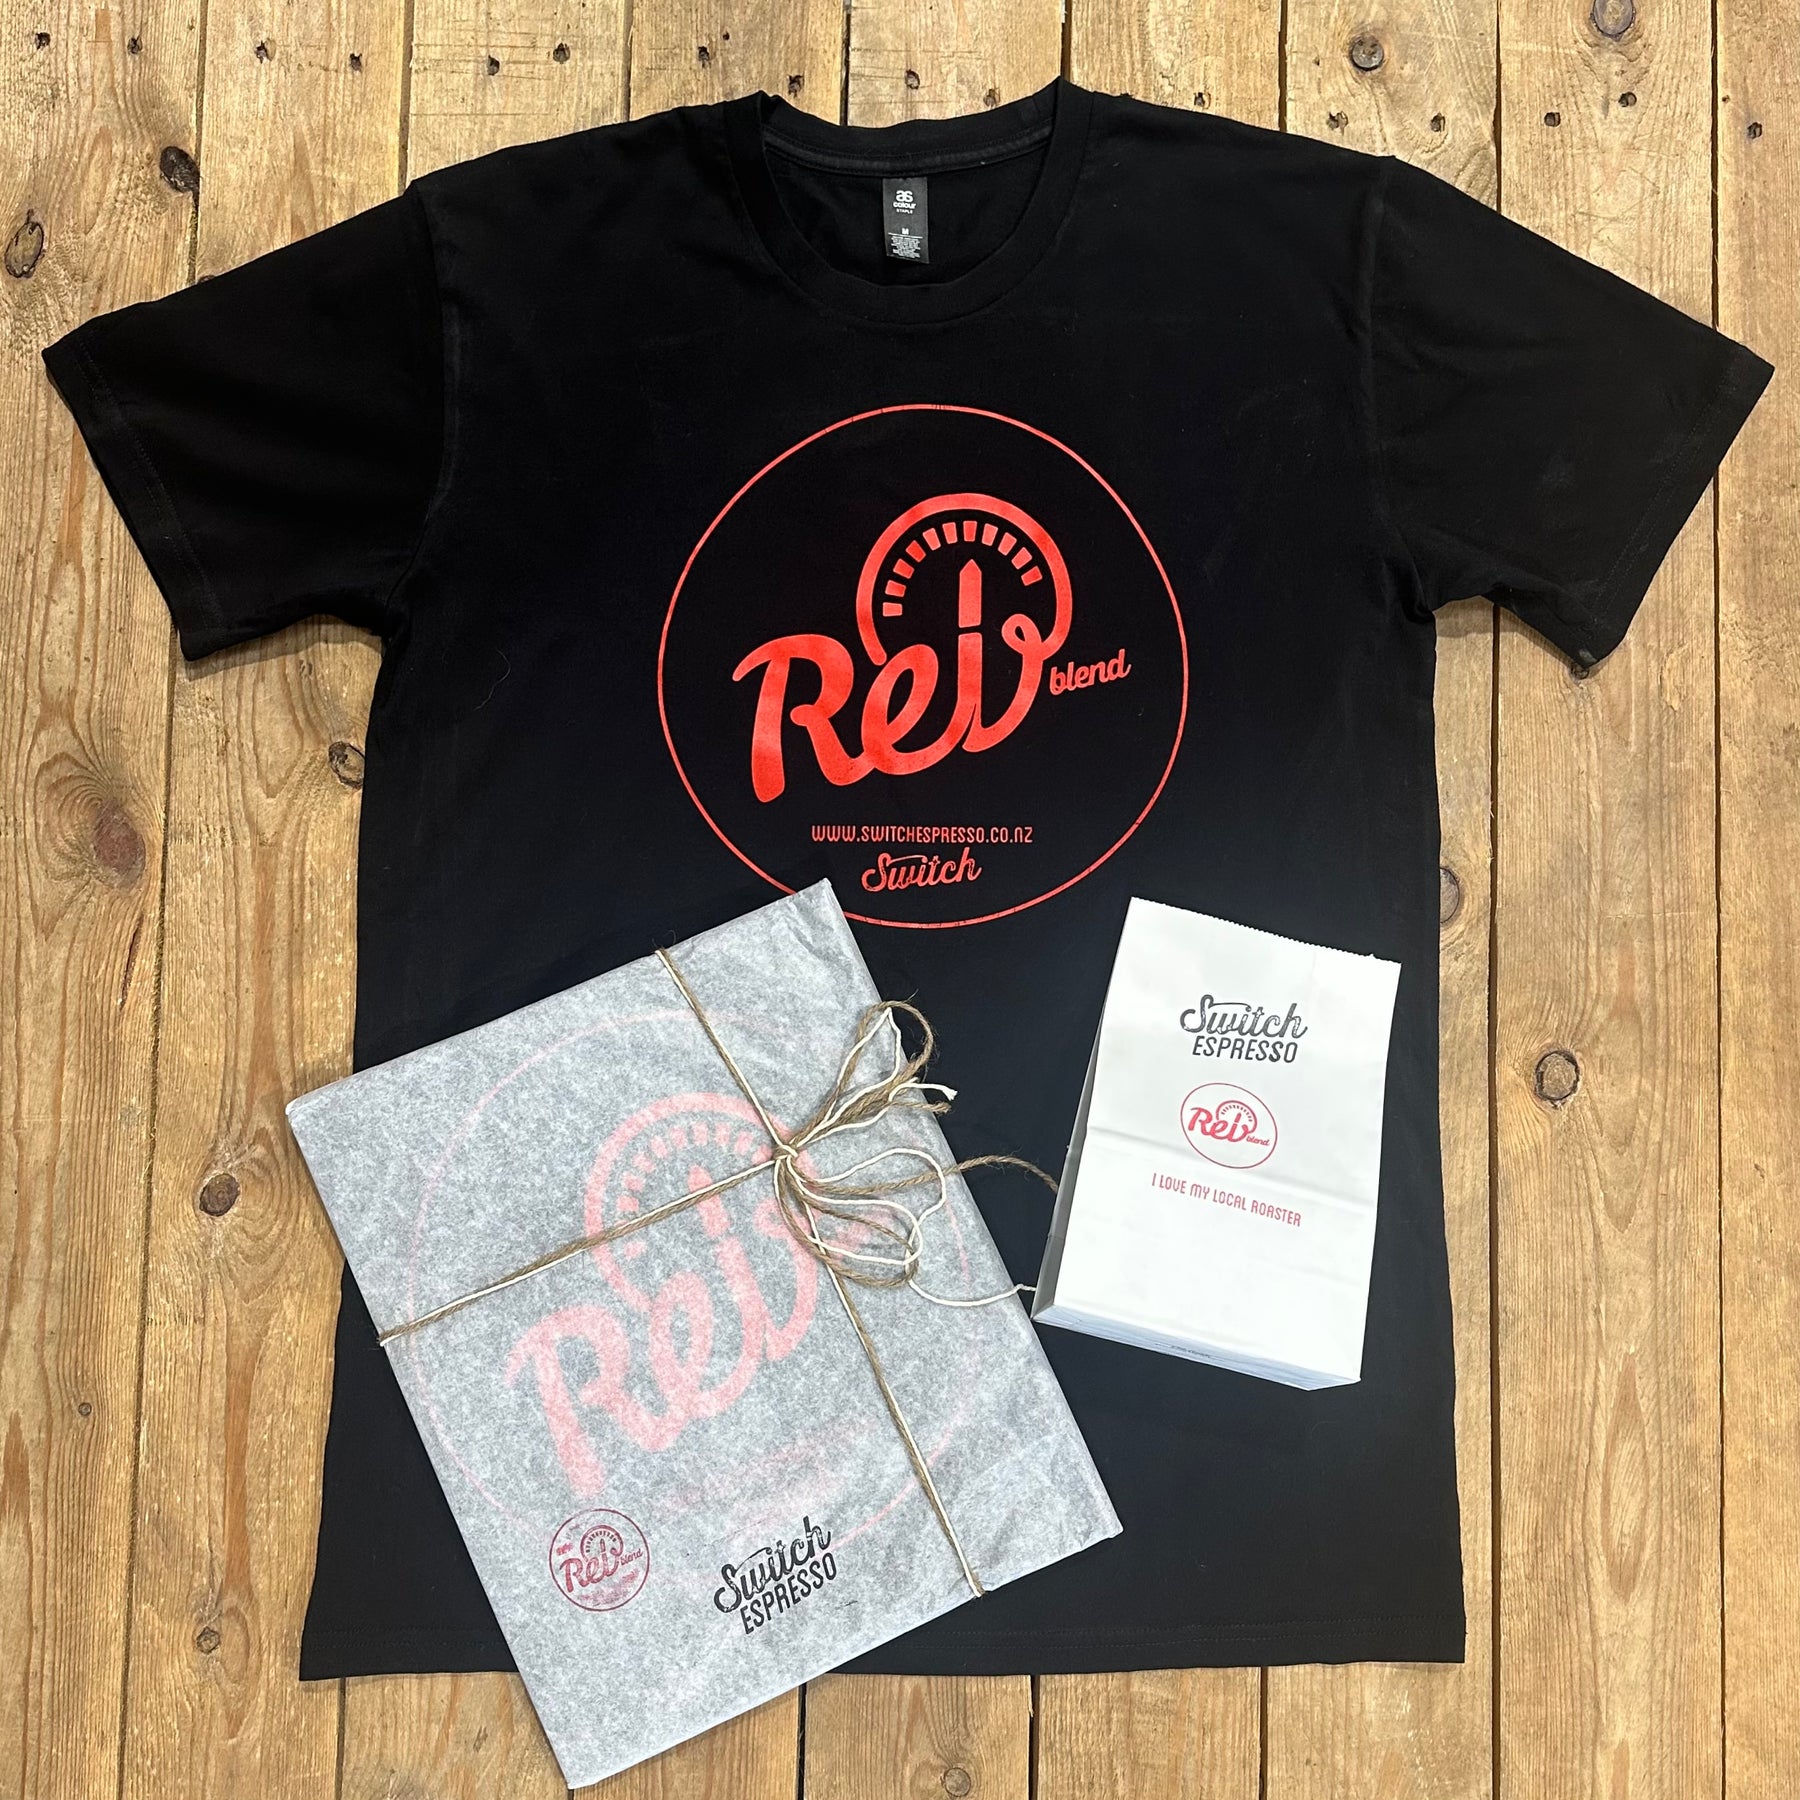 The Rev Tee and Blend Pack